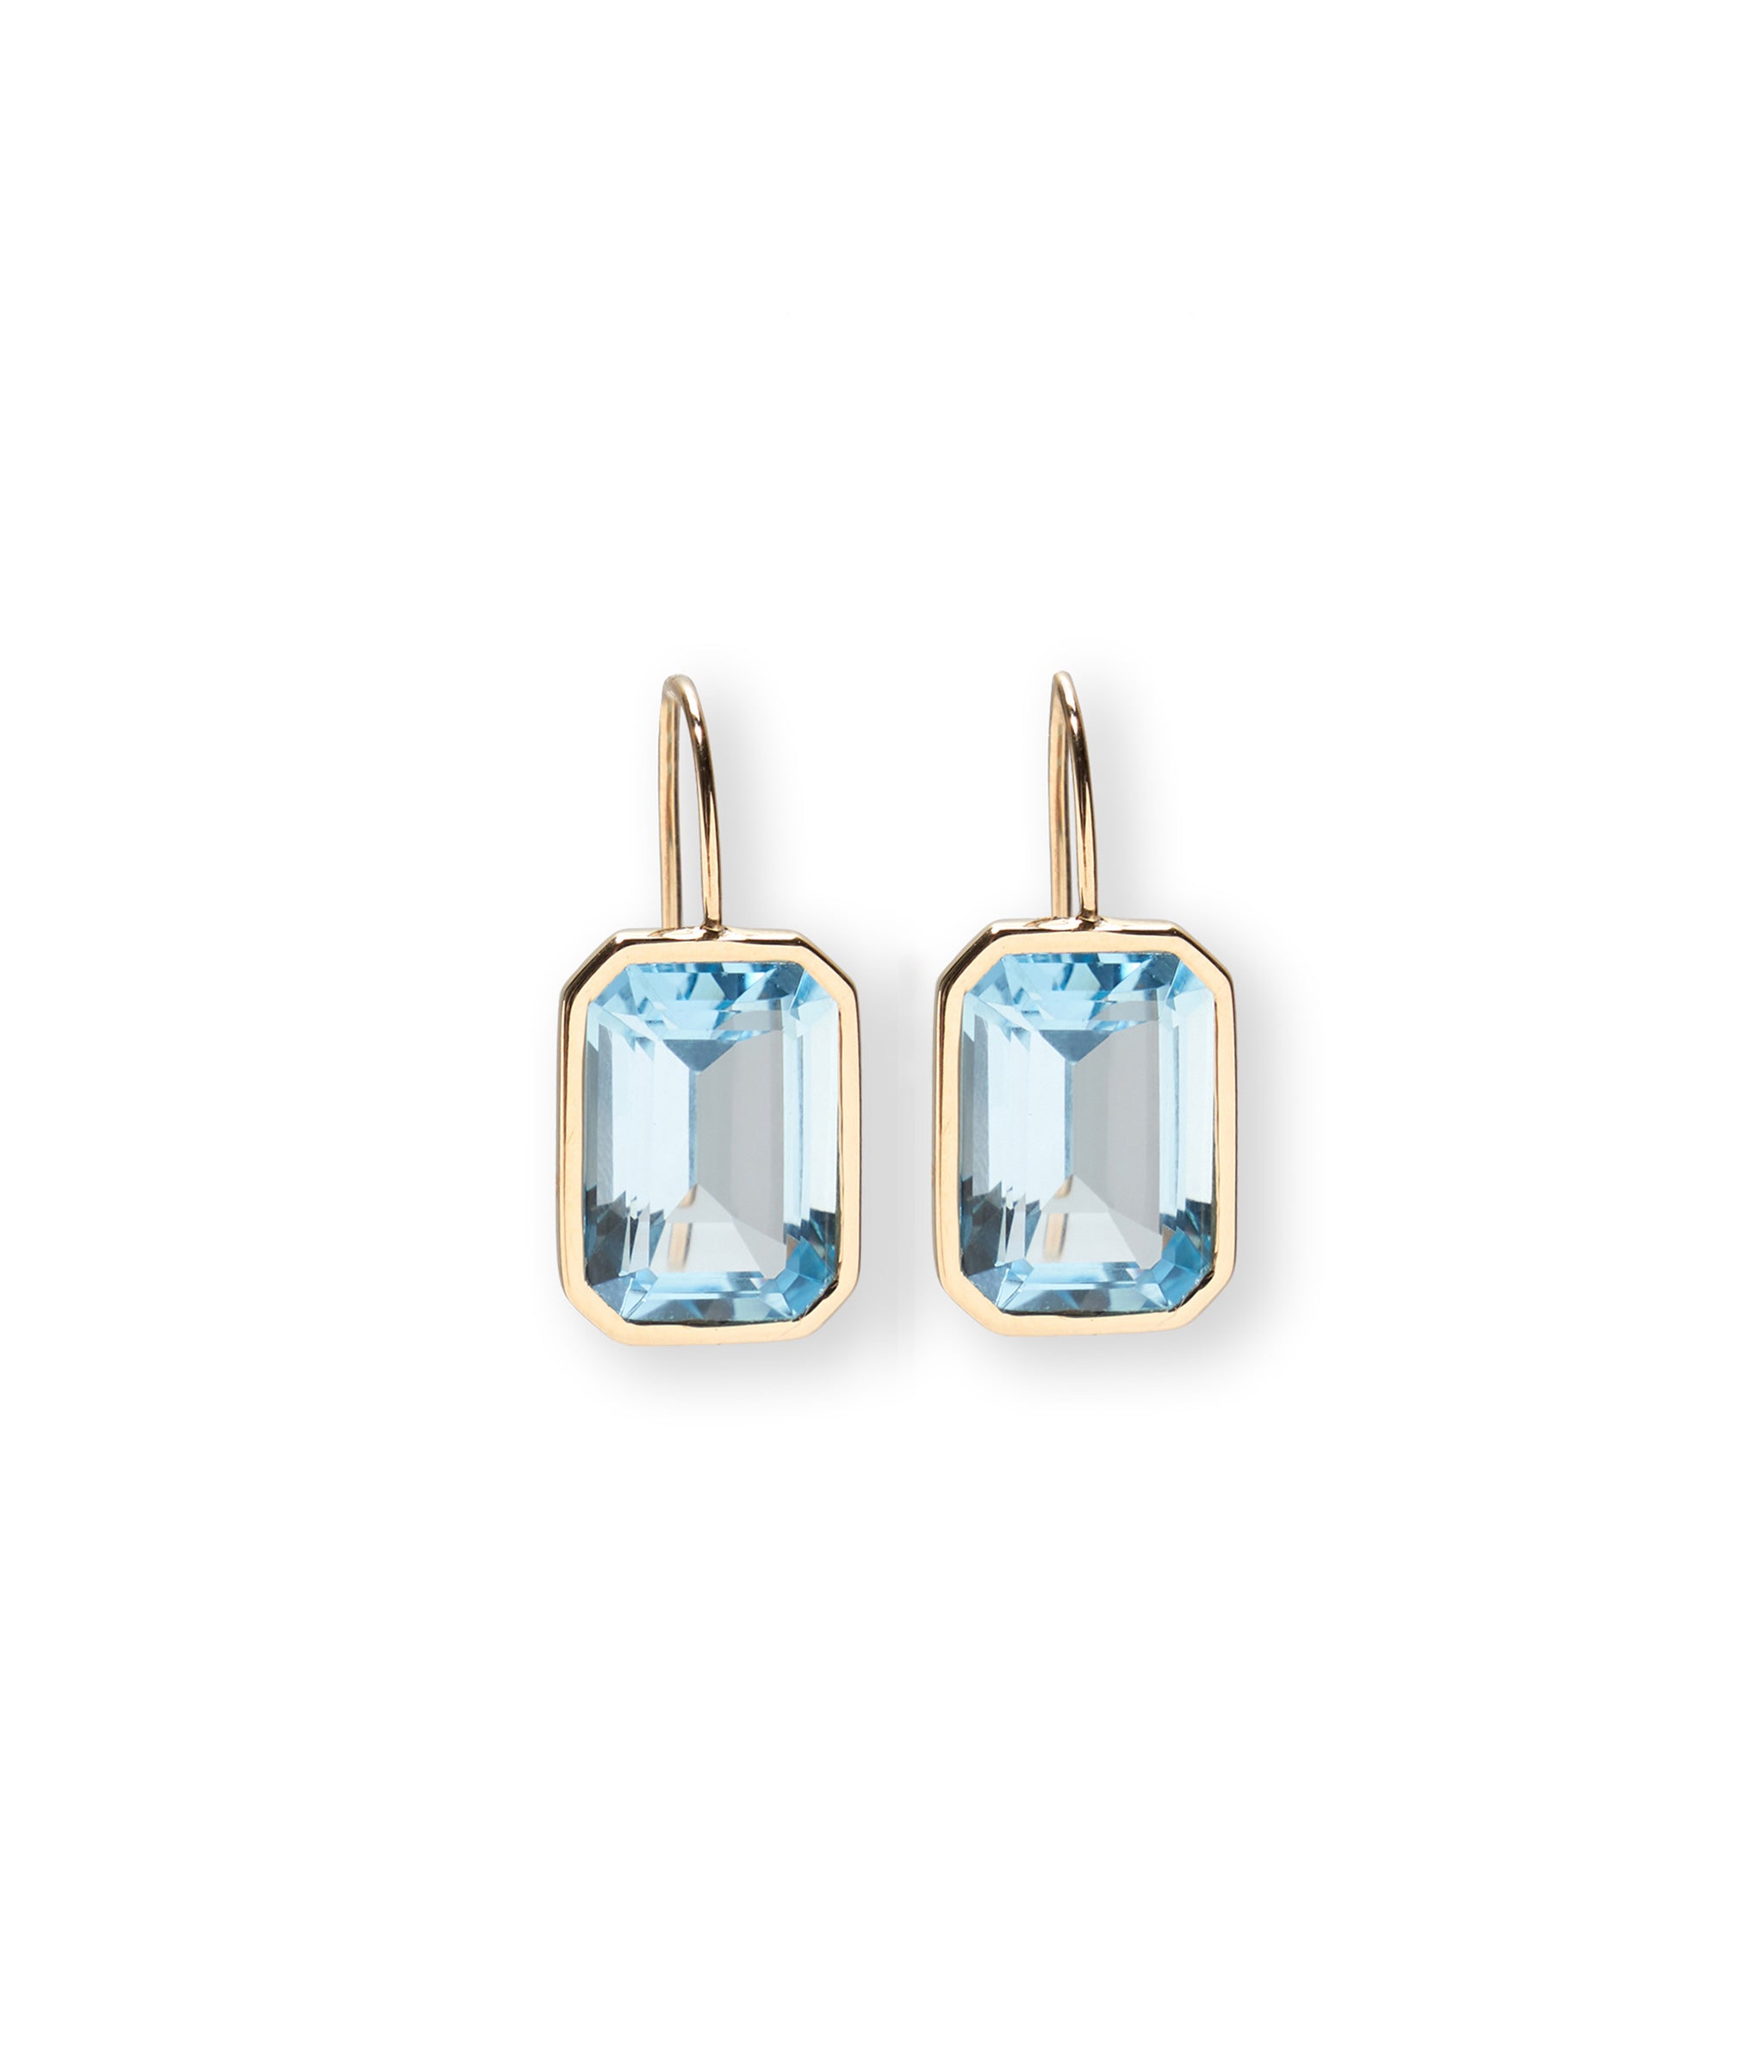 Aria Earrings in Sky Blue Topaz. Featuring large, faceted sky blue topaz stones with 14k gold bezels and earwires.